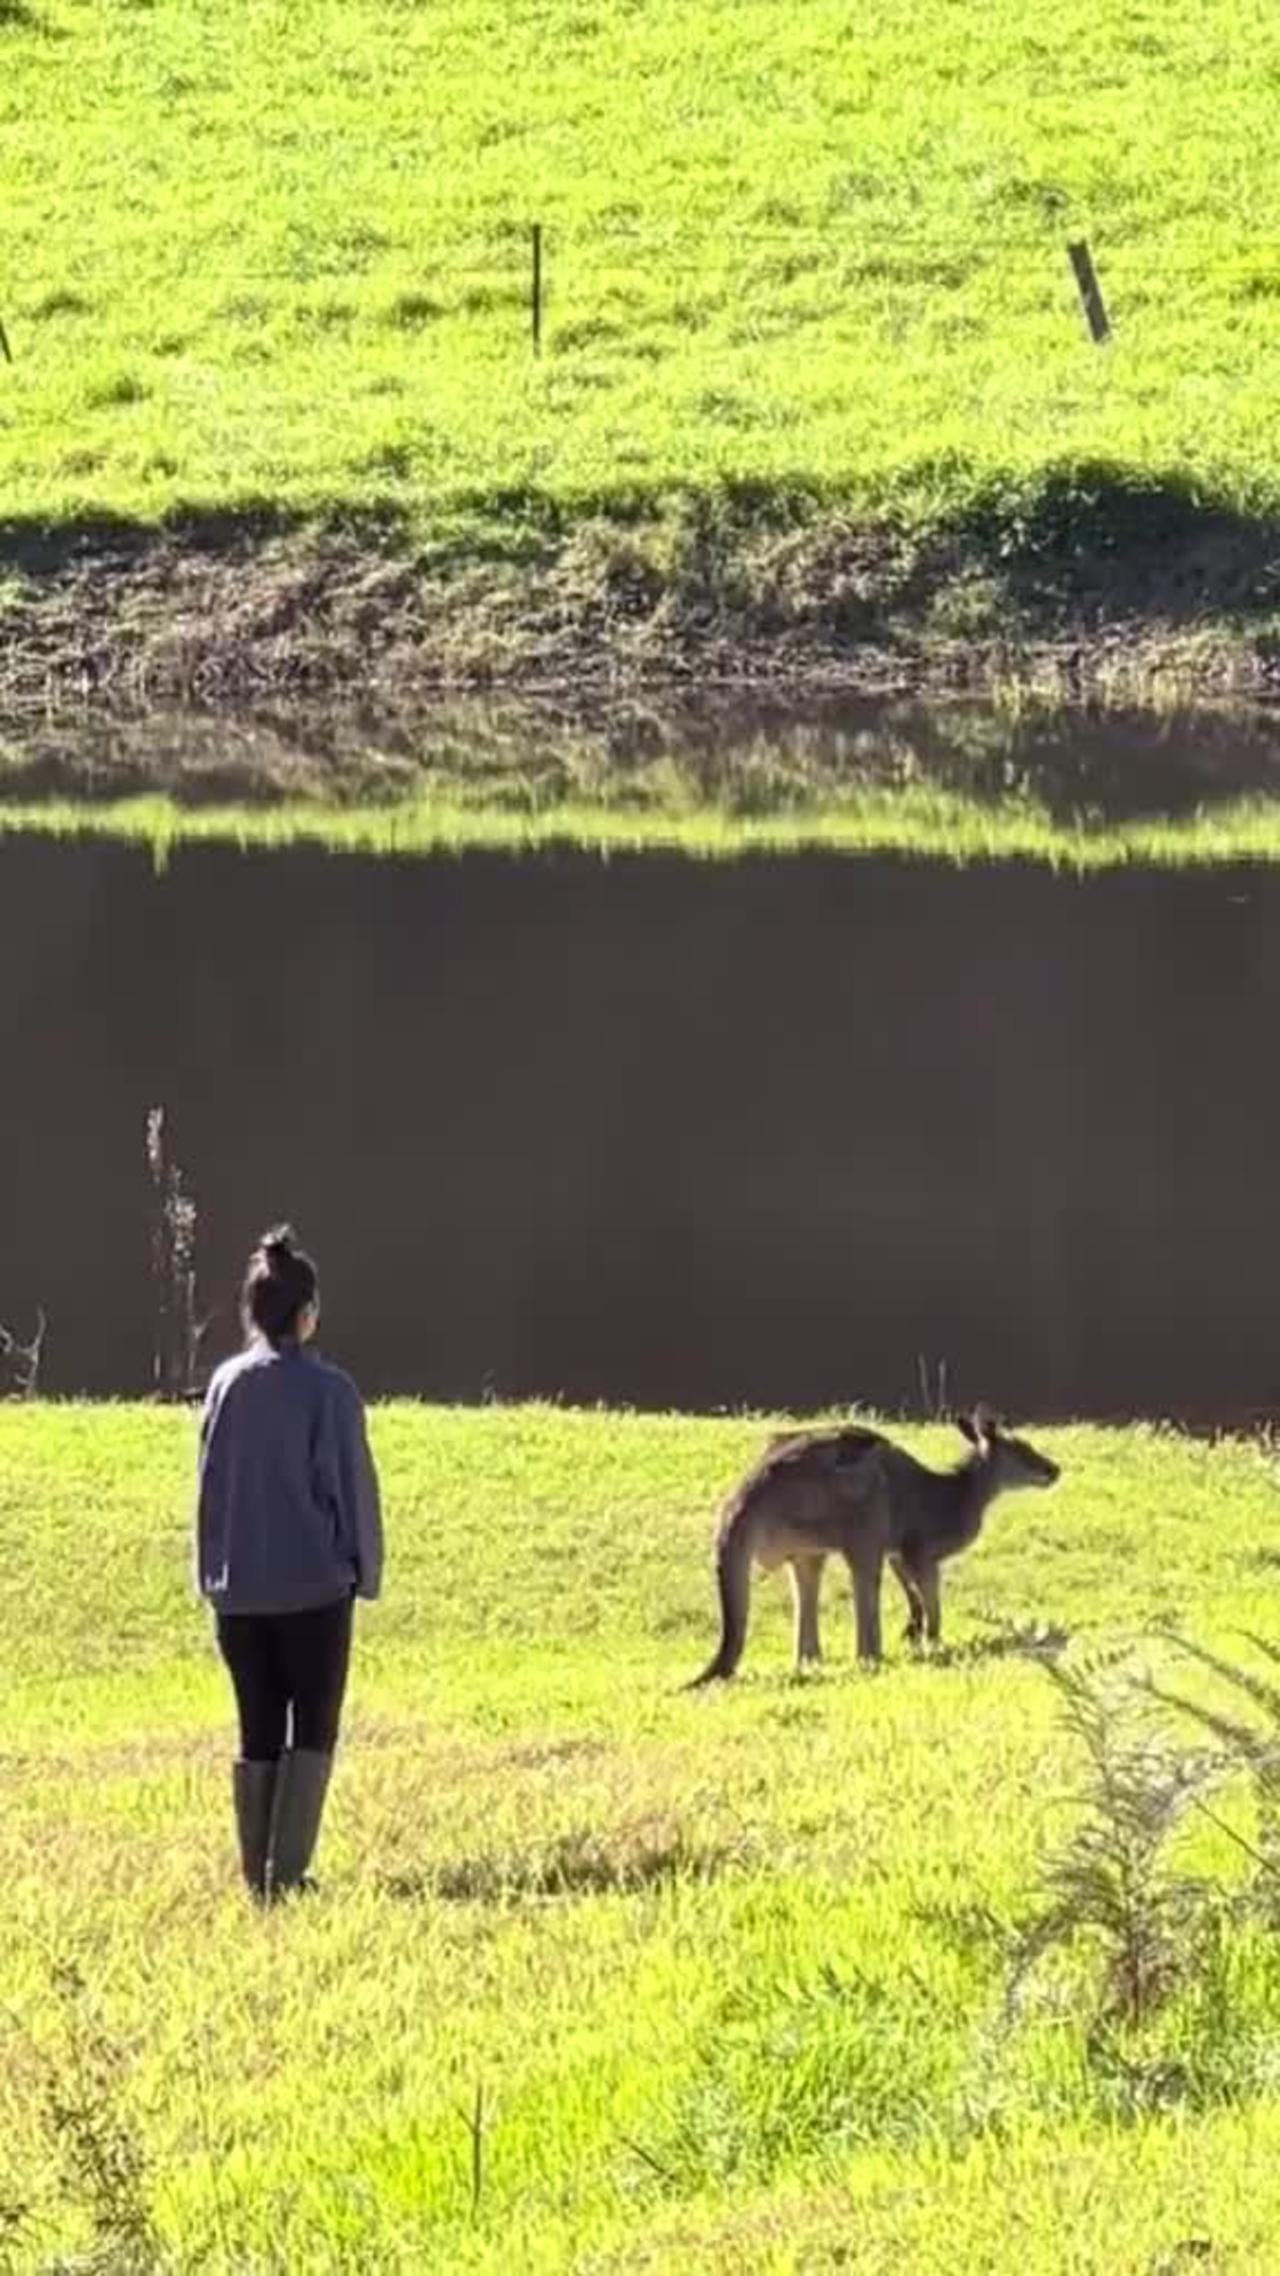 How Not to Approach a Kangaroo